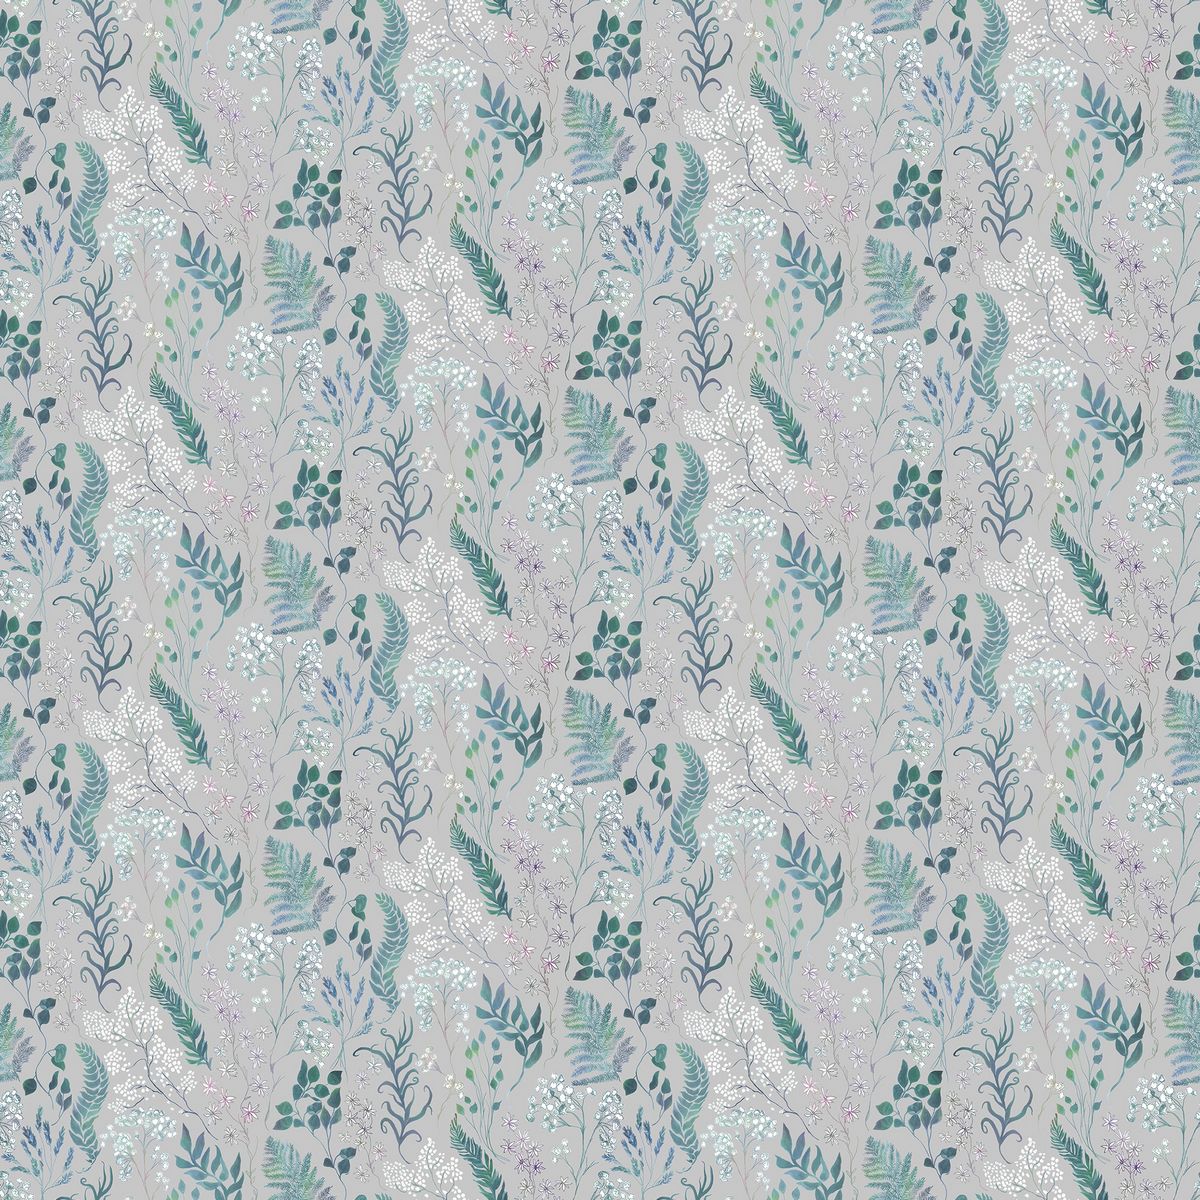 Aileana Crescent Fabric by Voyage Maison